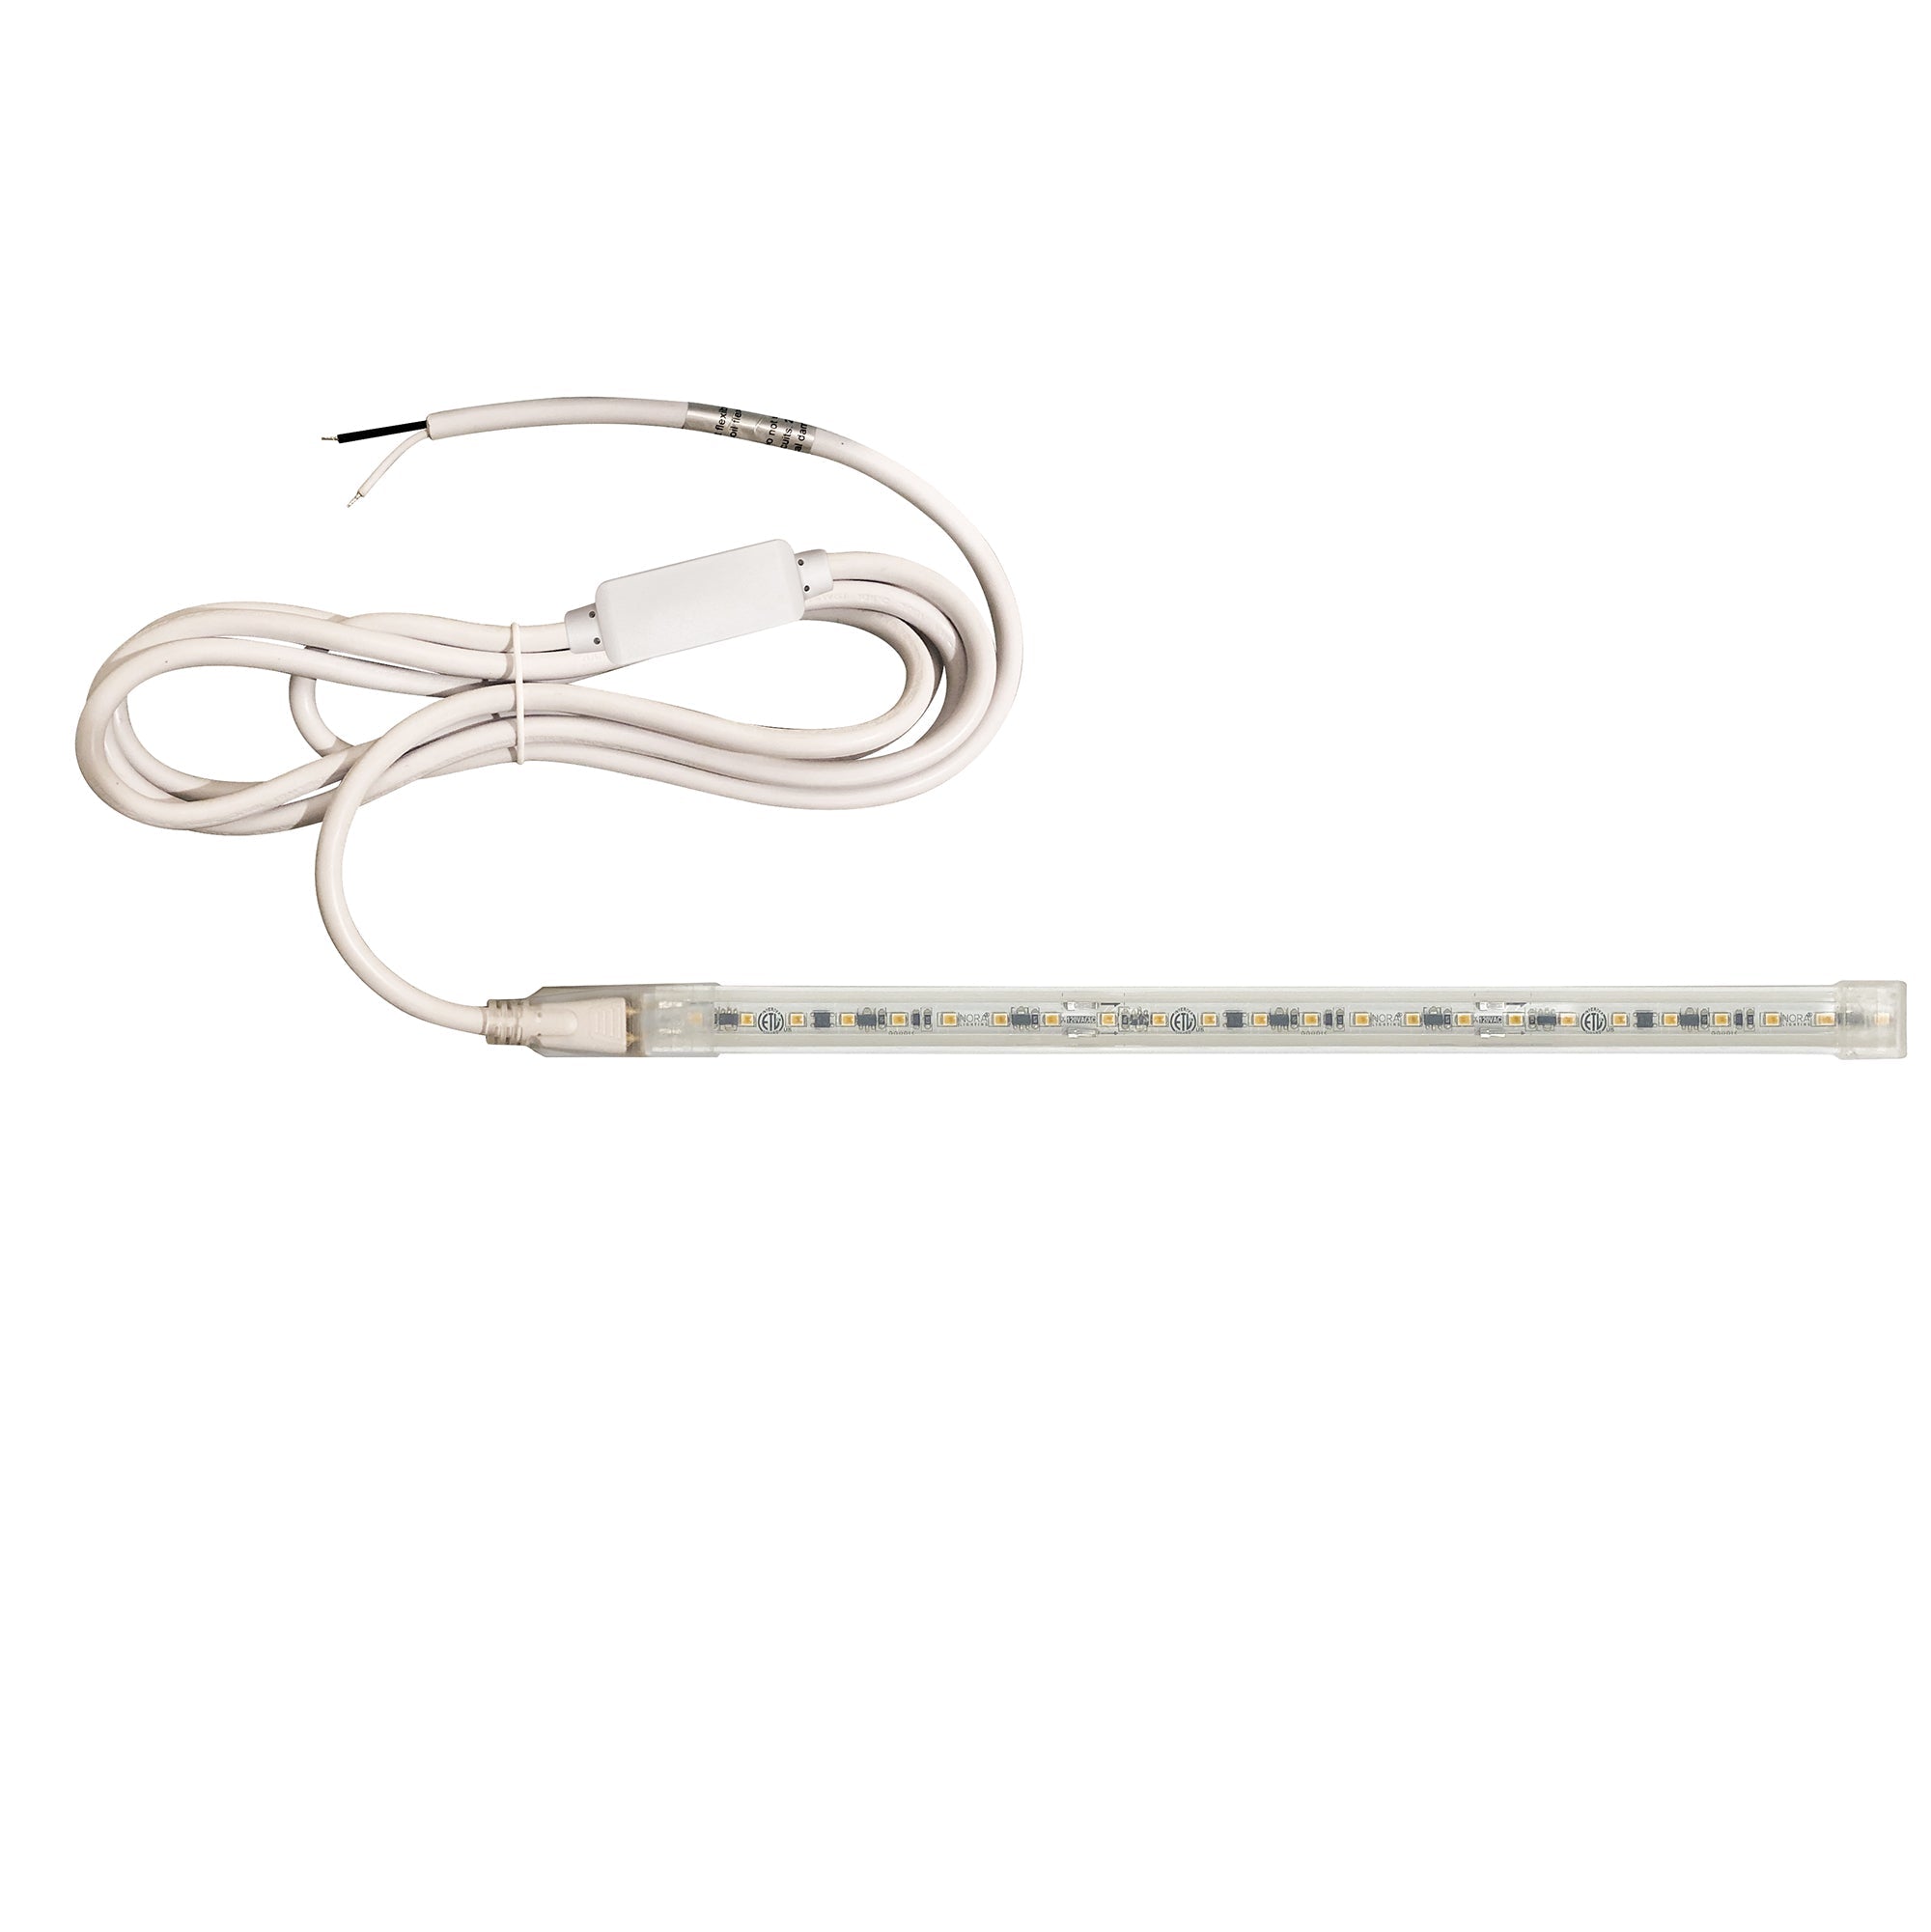 Nora Lighting NUTP13-W83-12-930/HWSP - Accent / Undercabinet - Custom Cut 83-ft 120V Continuous LED Tape Light, 330lm / 3.6W per foot, 3000K, w/ Mounting Clips and 8' Hardwired Power Cord w/ Surge Protector